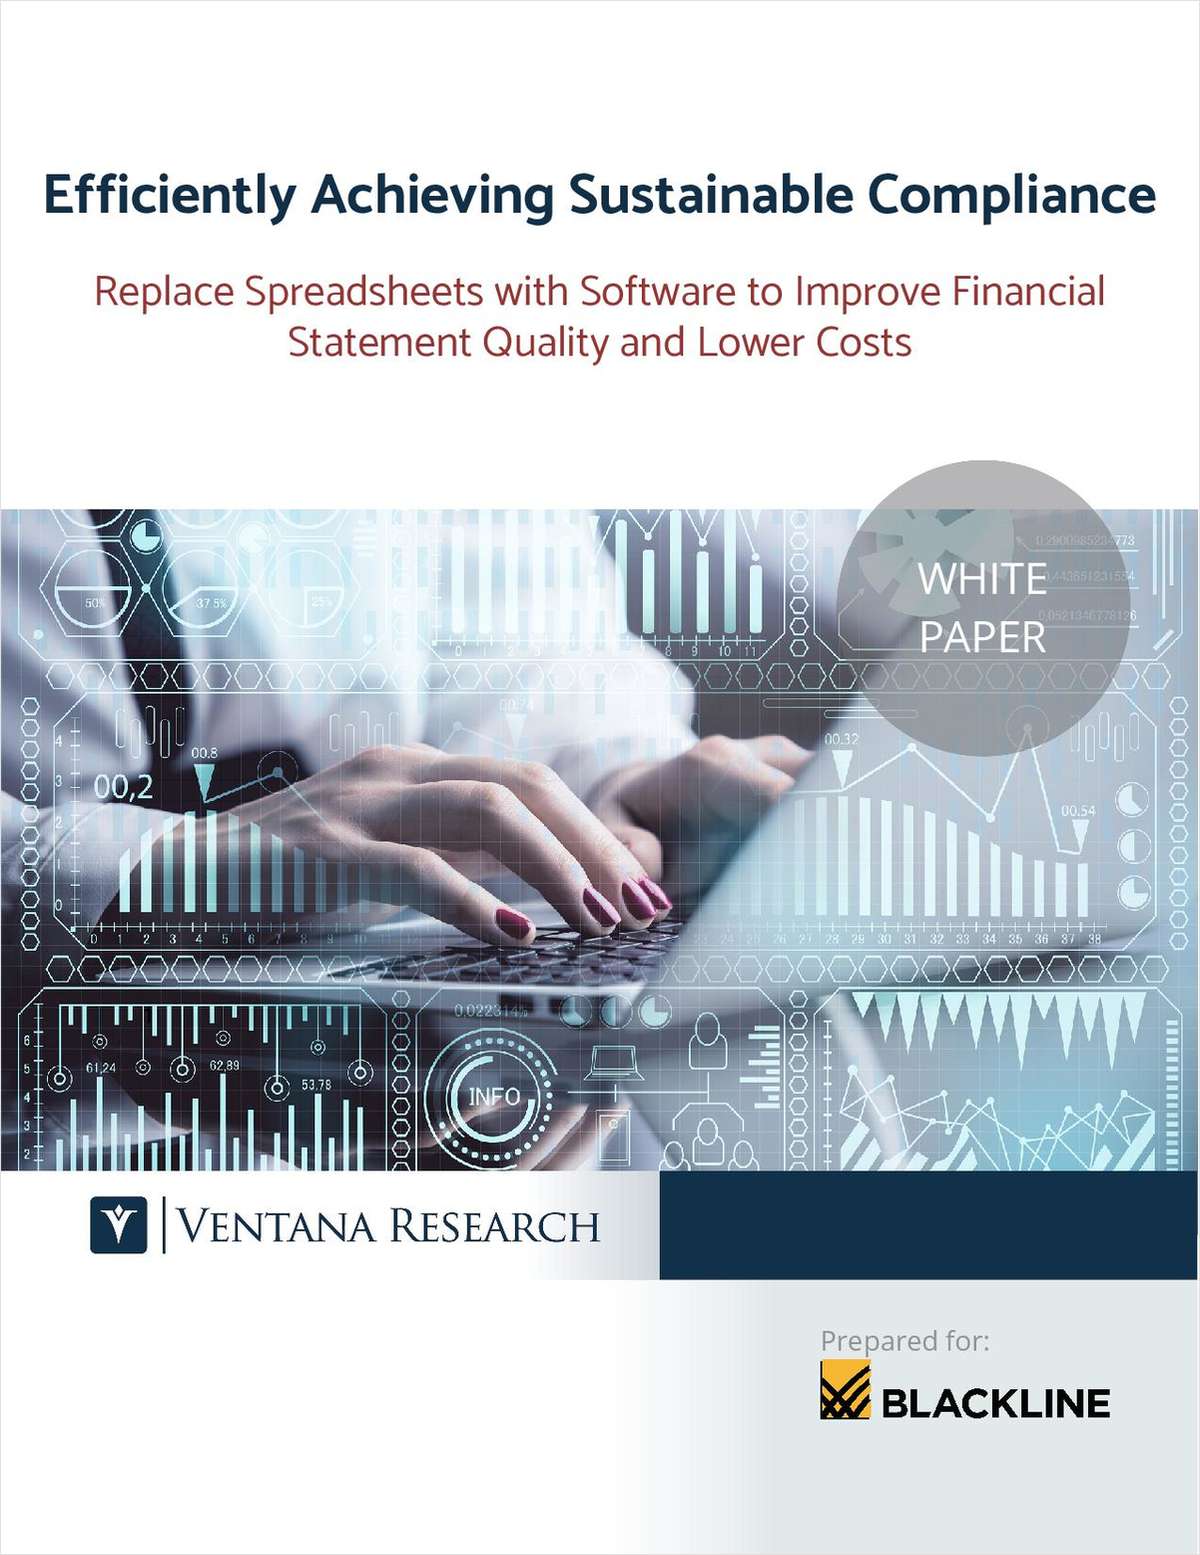 Ventana Research: Efficiently Achieving Sustainable Compliance